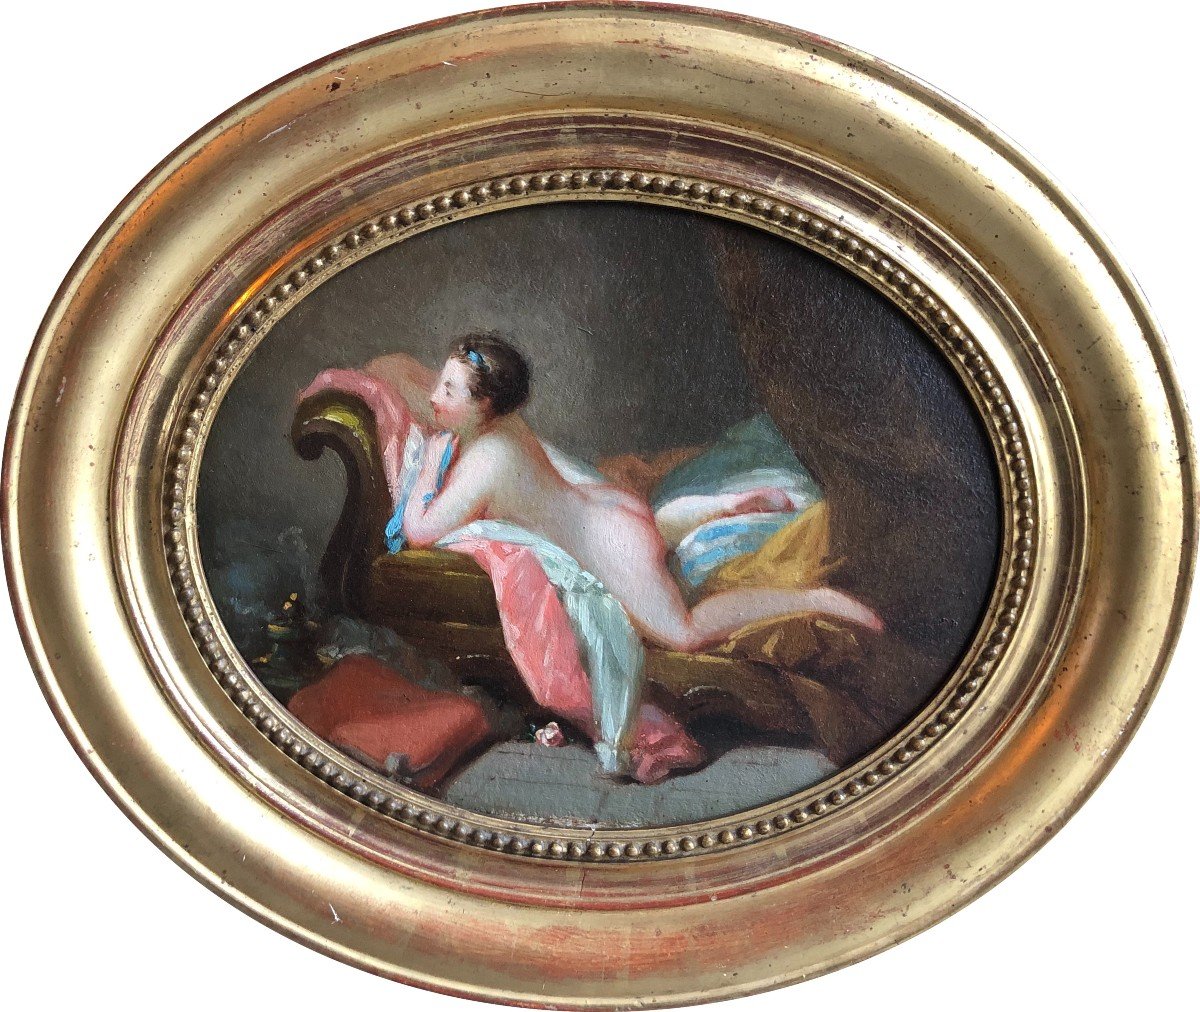 French School Of The Nineteenth, After François Boucher, Nude Of Woman: Odalisque, Oil